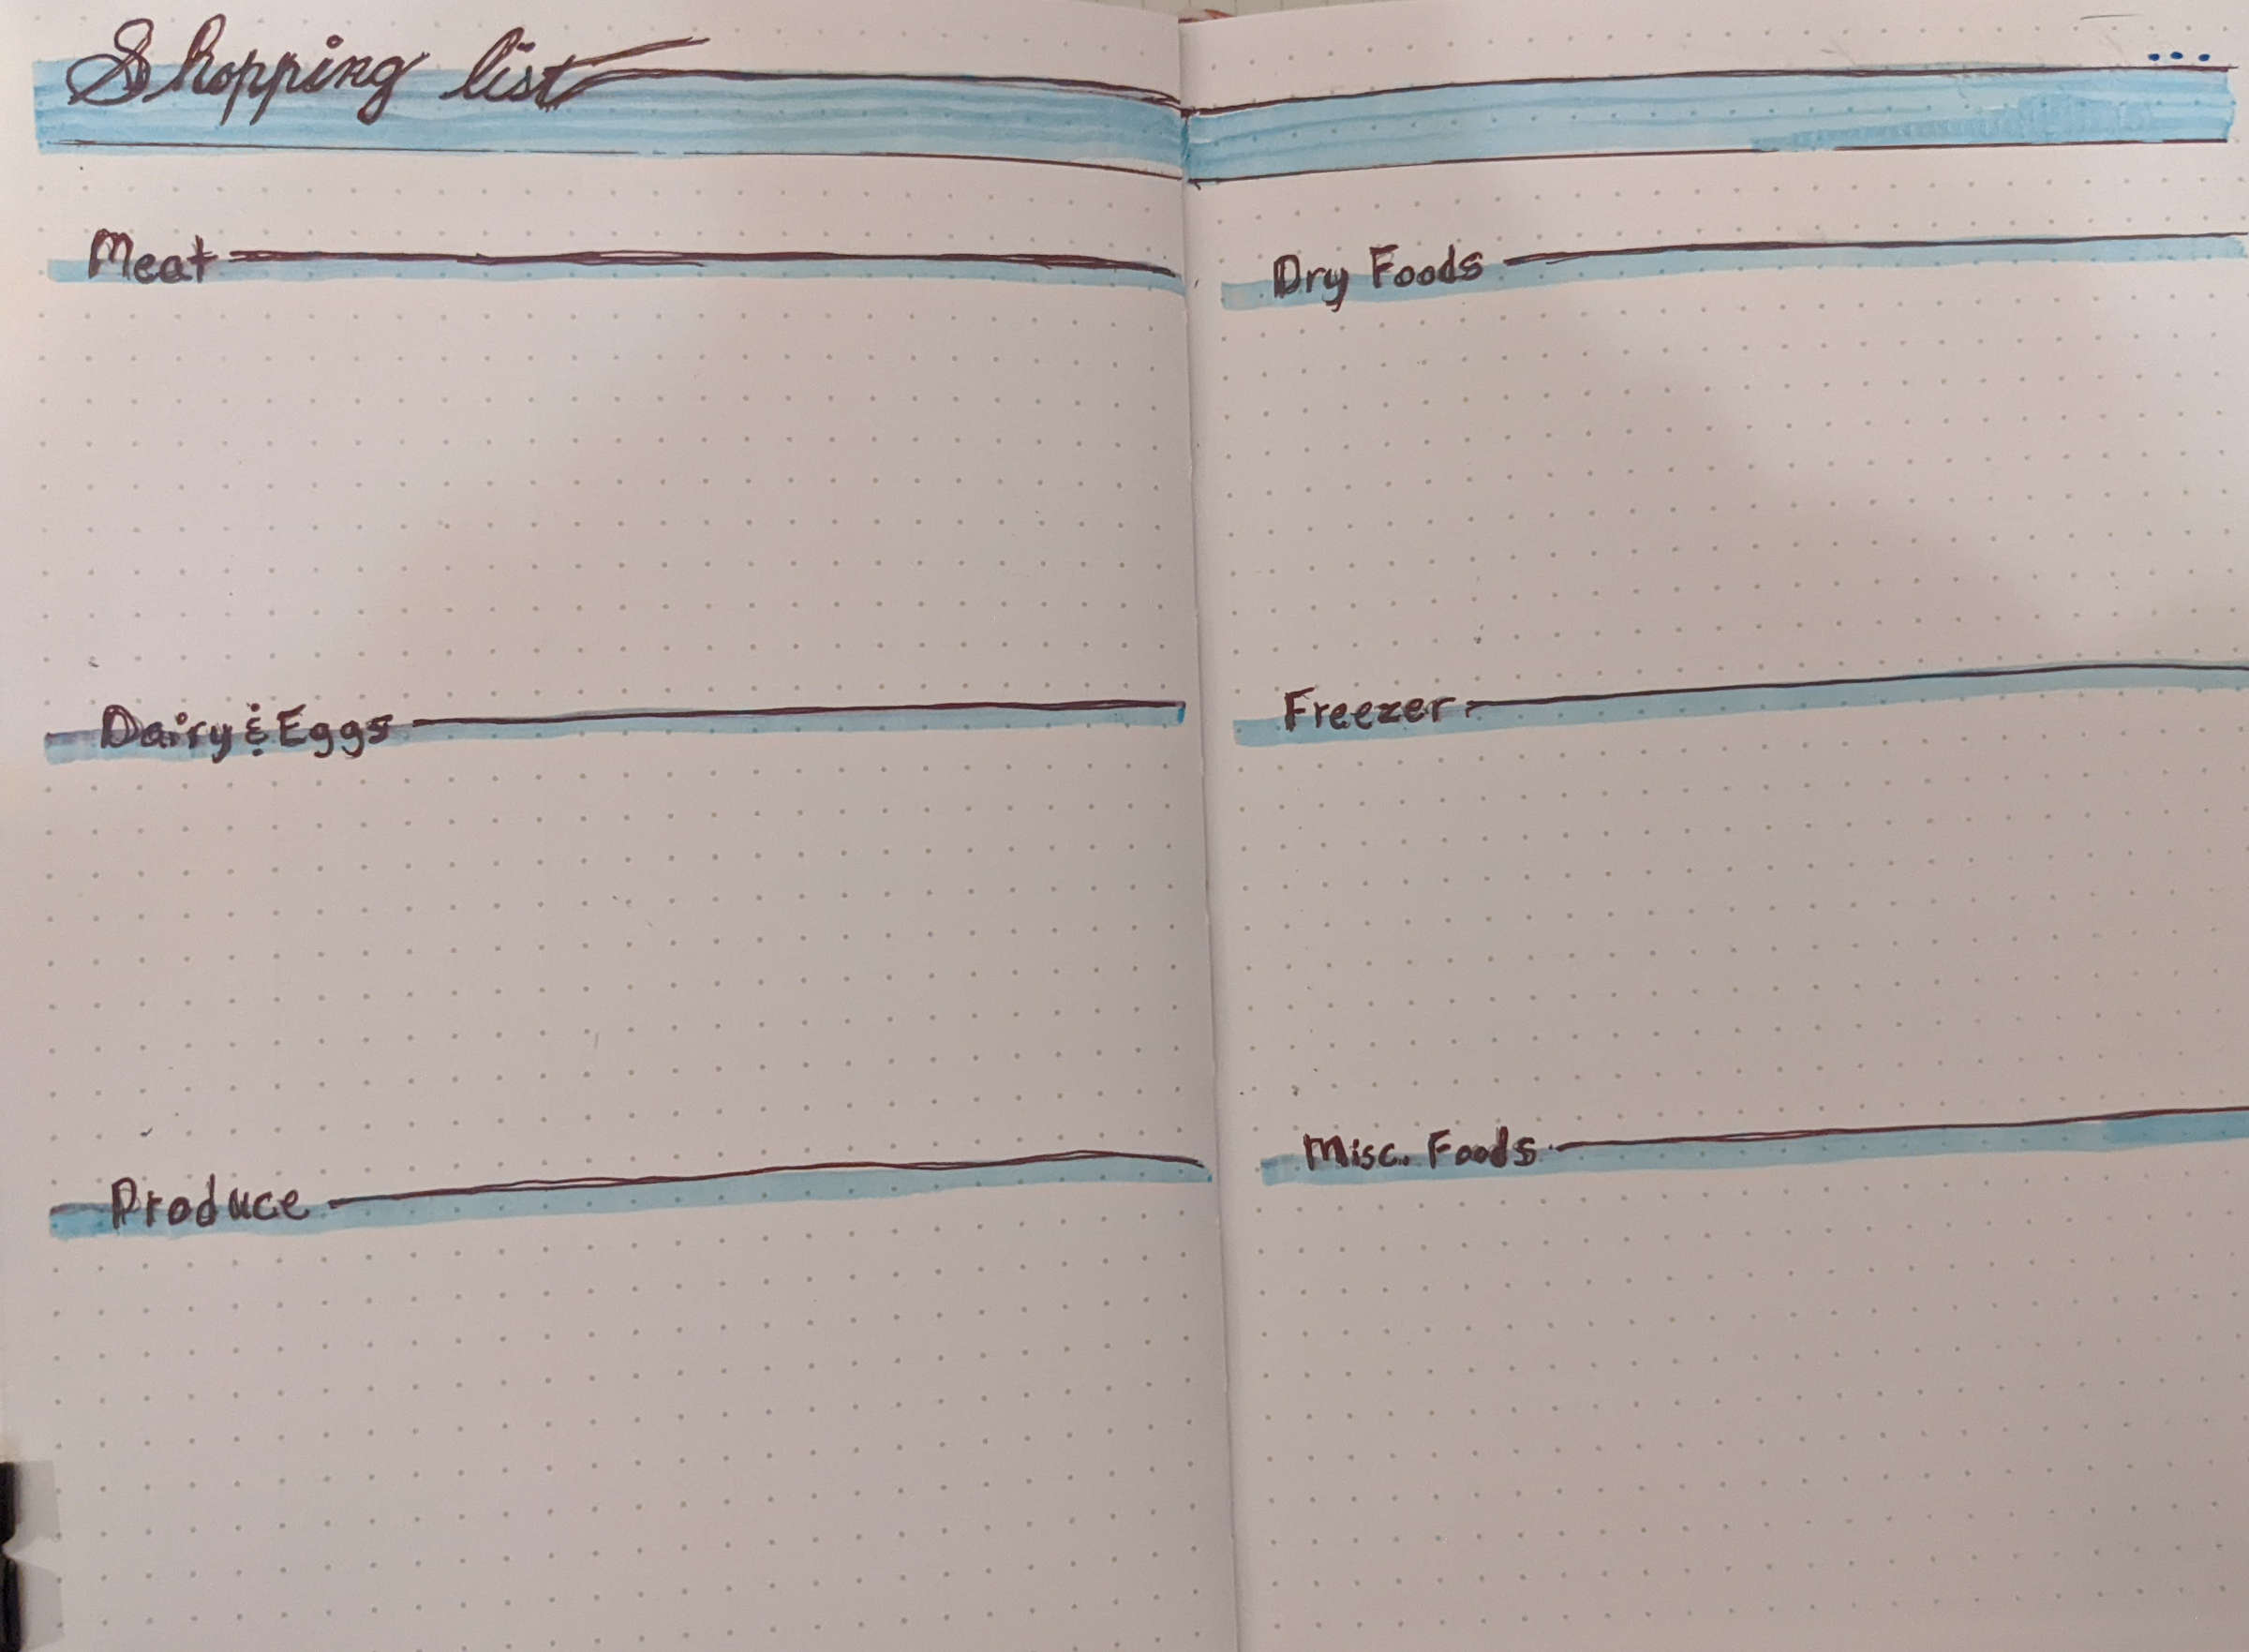 Two-page bullet journal spread that breaks down groceries by category.